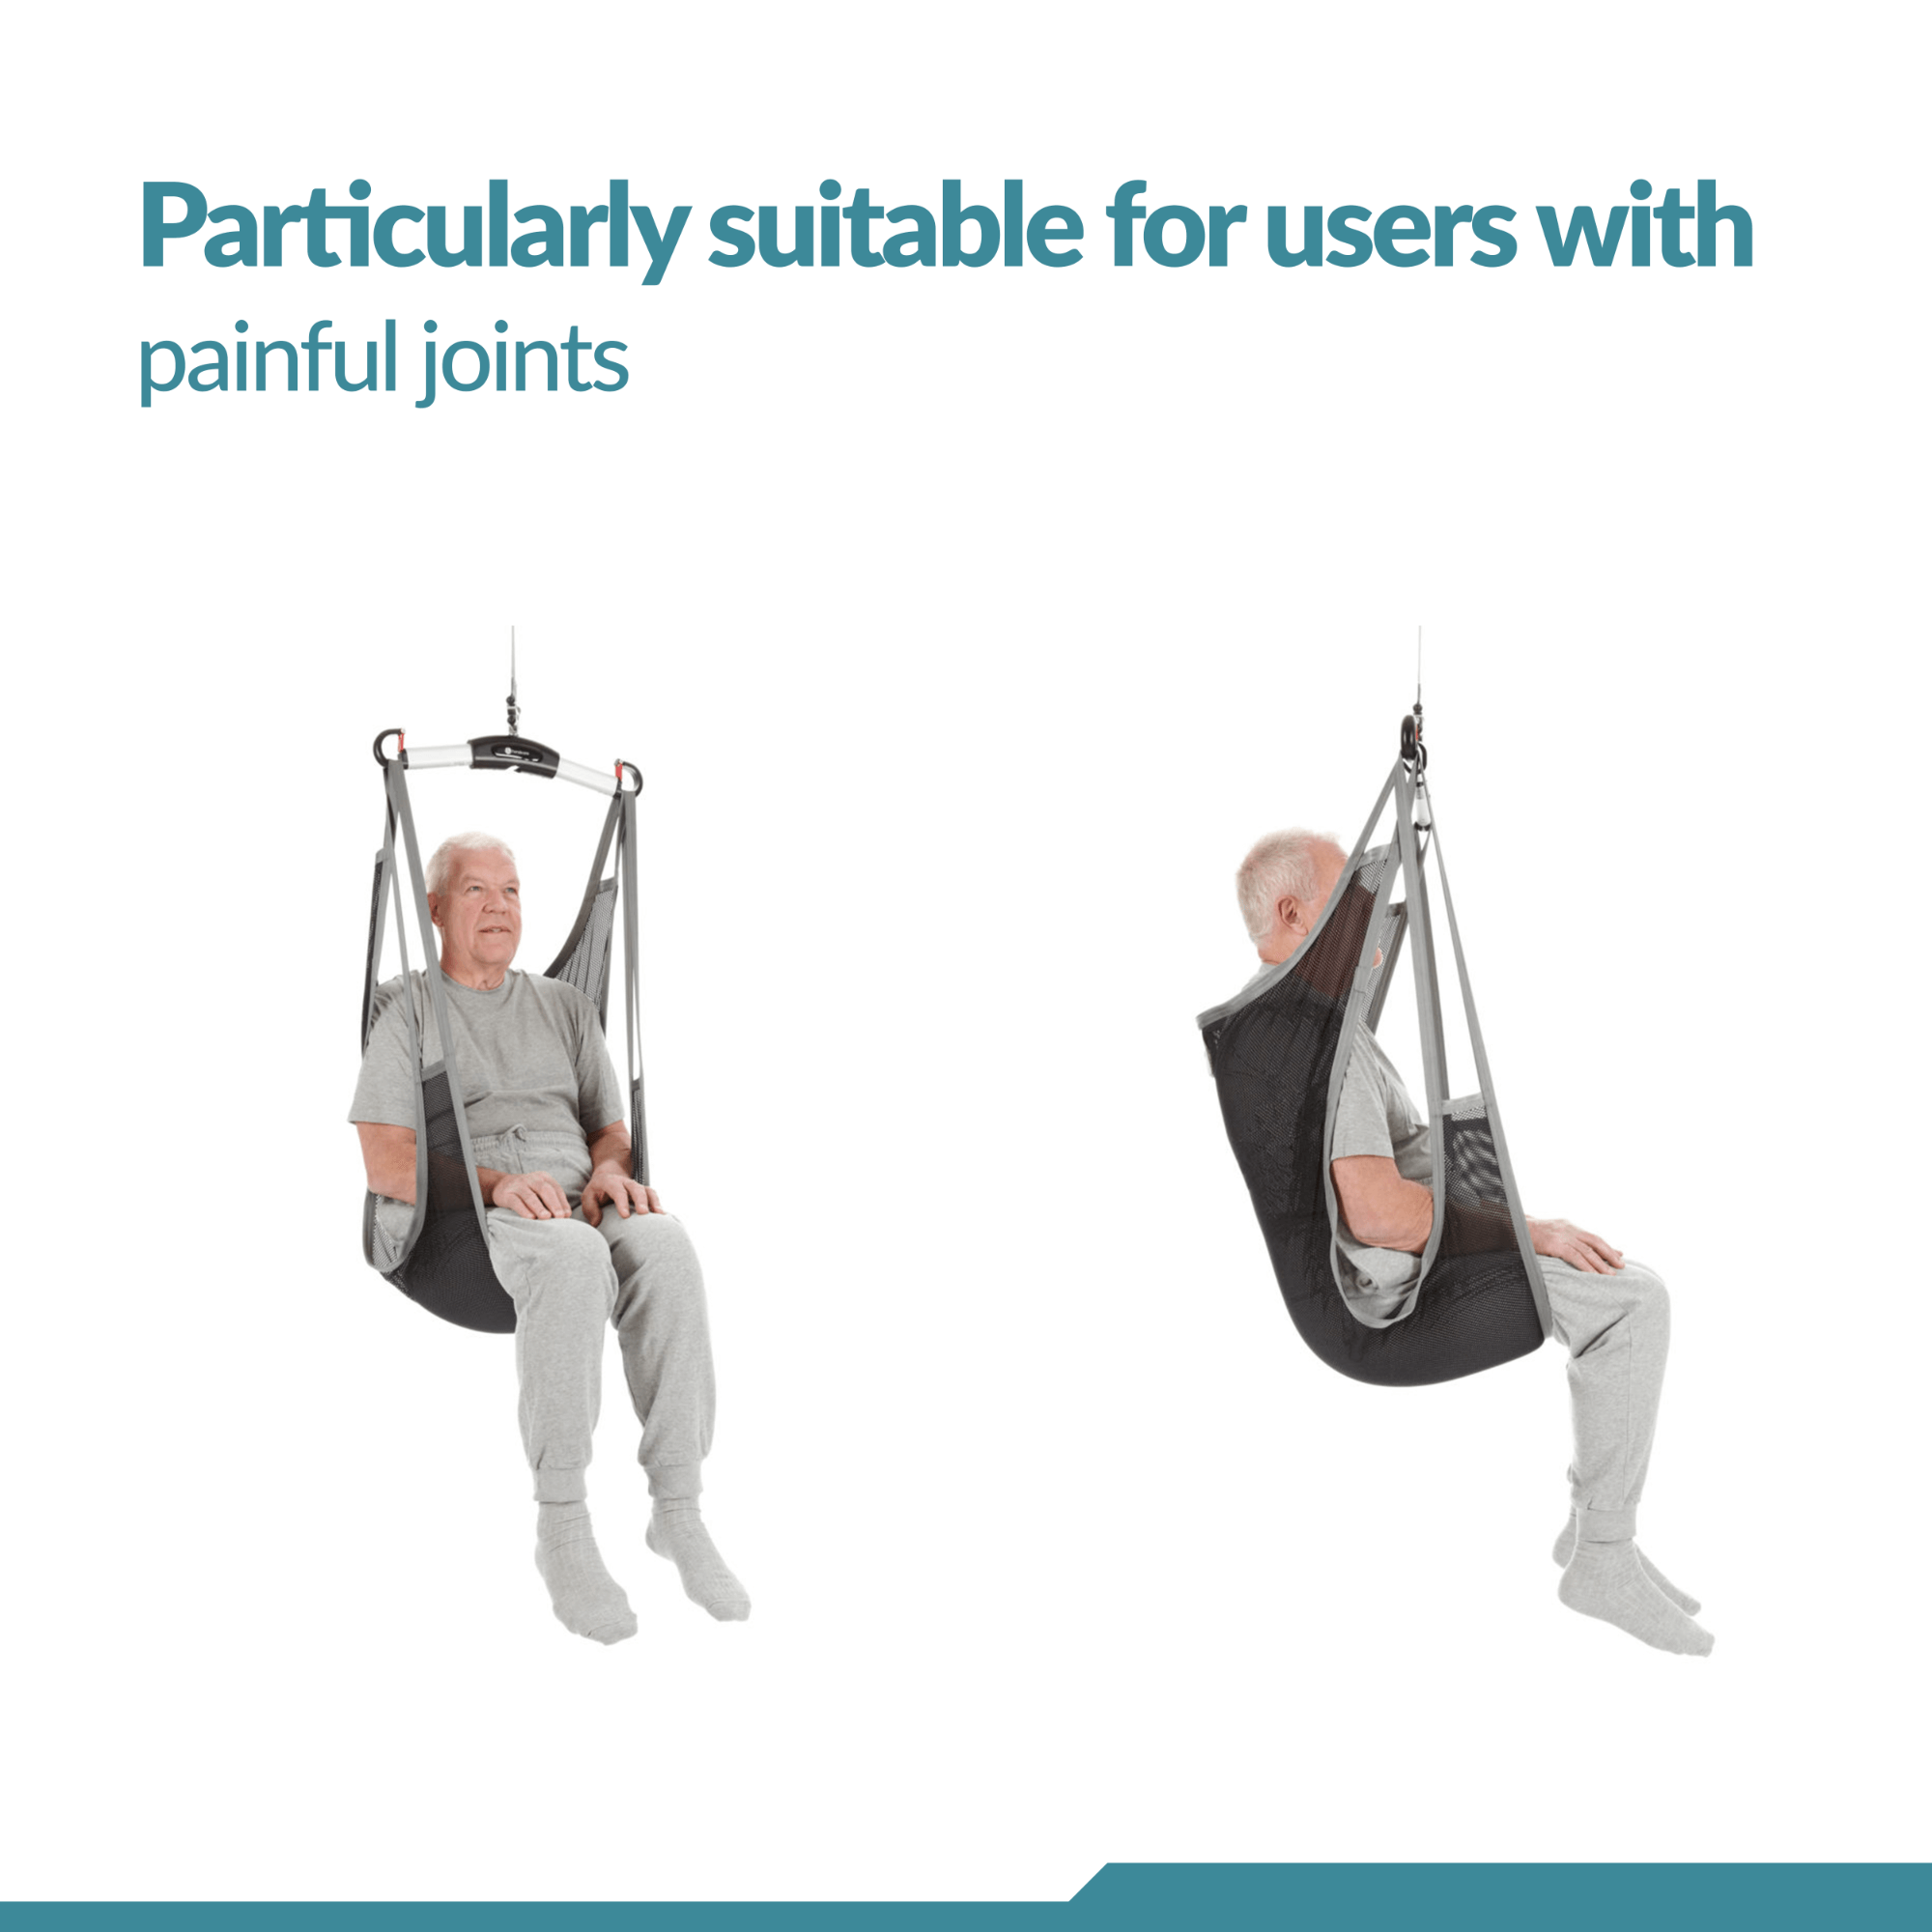 Standard Sling - Universal Patient Lift Sling for Lifts for Home Use - Transfer Safely with Patient Lifter - Compatible with Hoyer Lift - Easy-to-Use